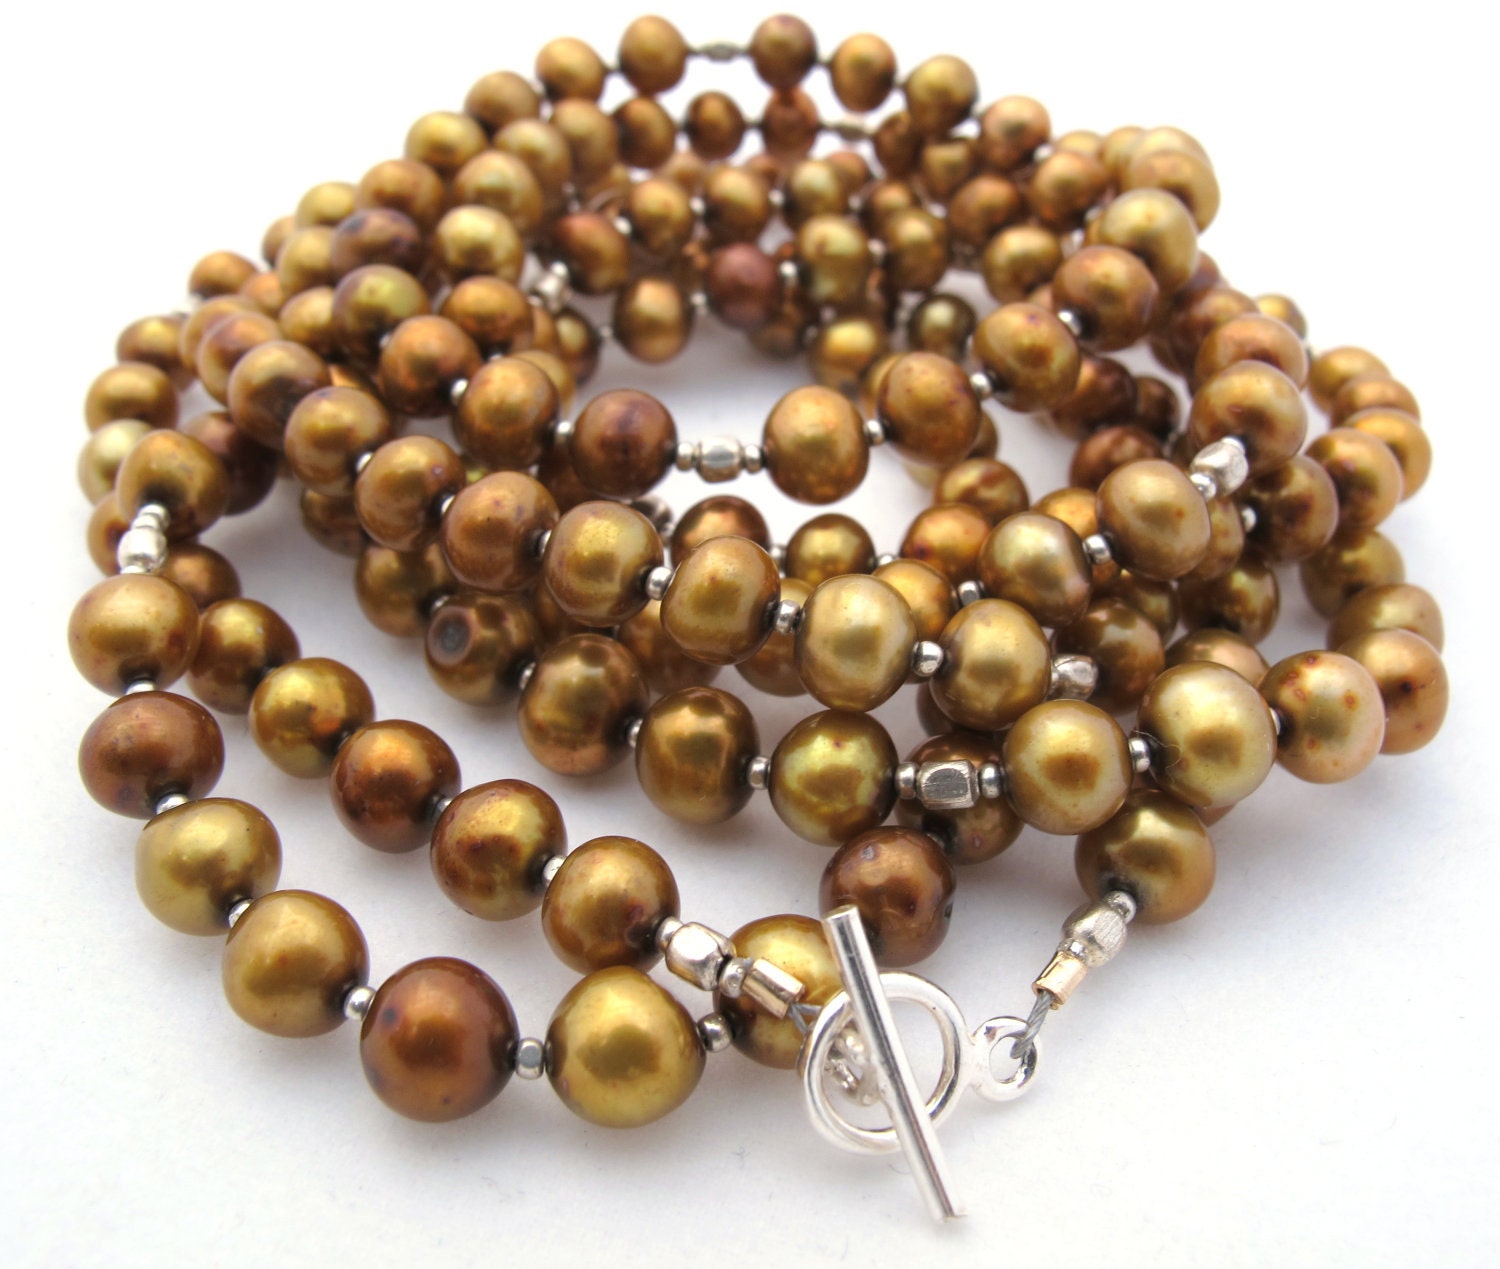 Statement Necklace - Carole's Pearls Gold